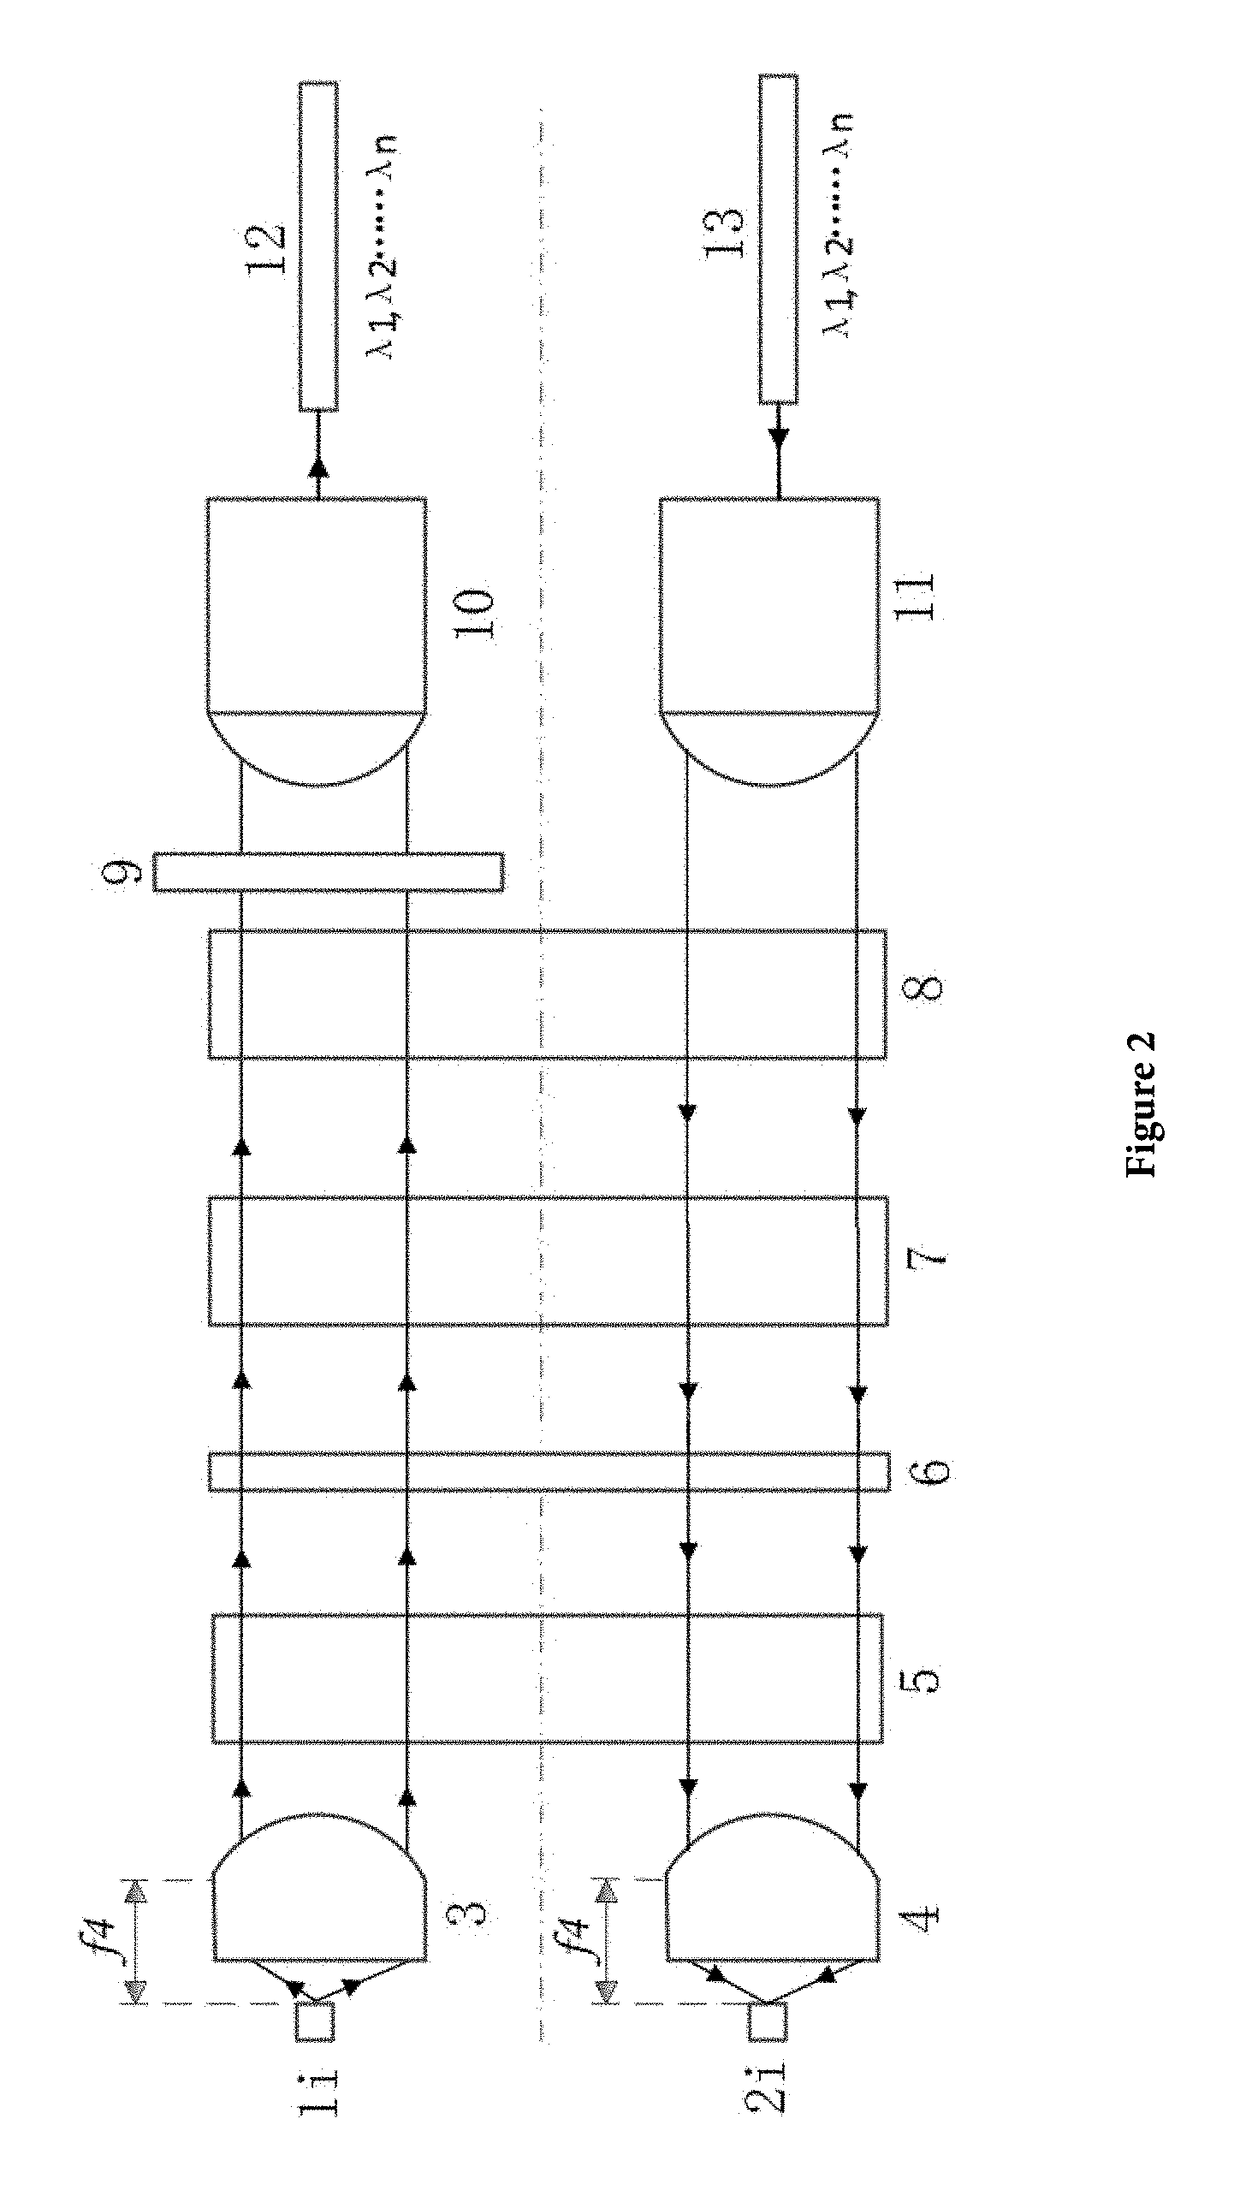 Wavelength Division Multiplexing/Demultiplexing Optical Transceiving Assembly Based on Diffraction Grating